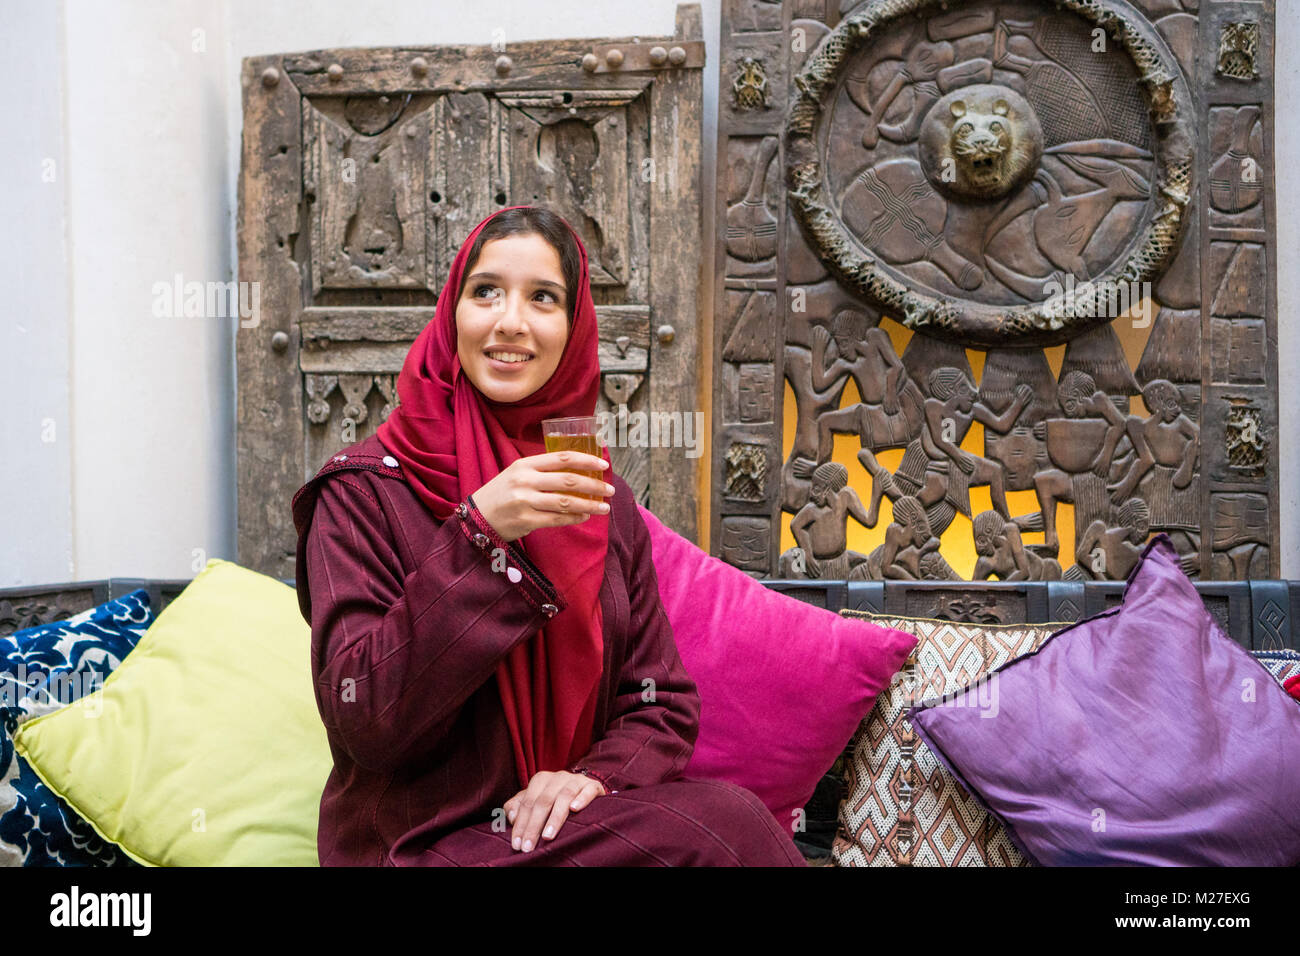 Arab woman in traditional red clothing with hijab on her head drinking a tea in traditional middle eastern ambient Stock Photo